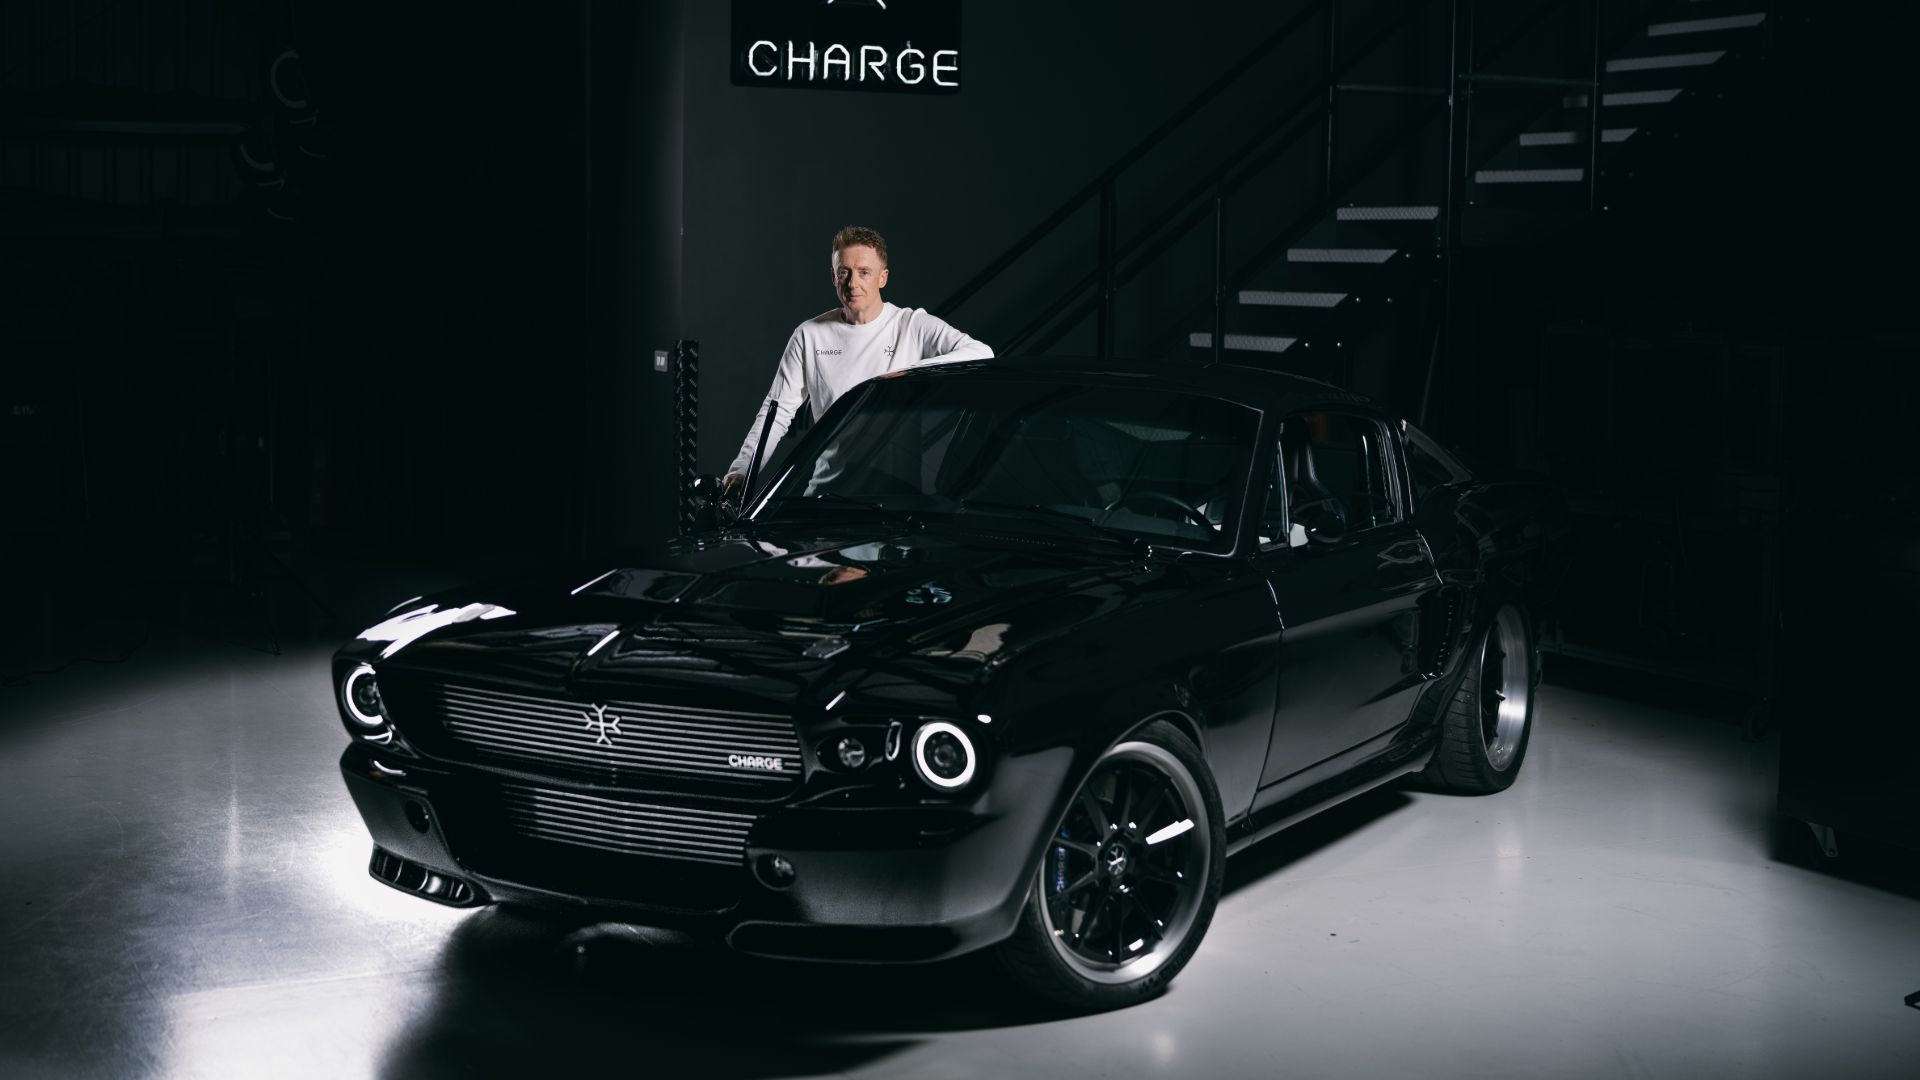 McLaren mind moves to electrify classic Mustangs